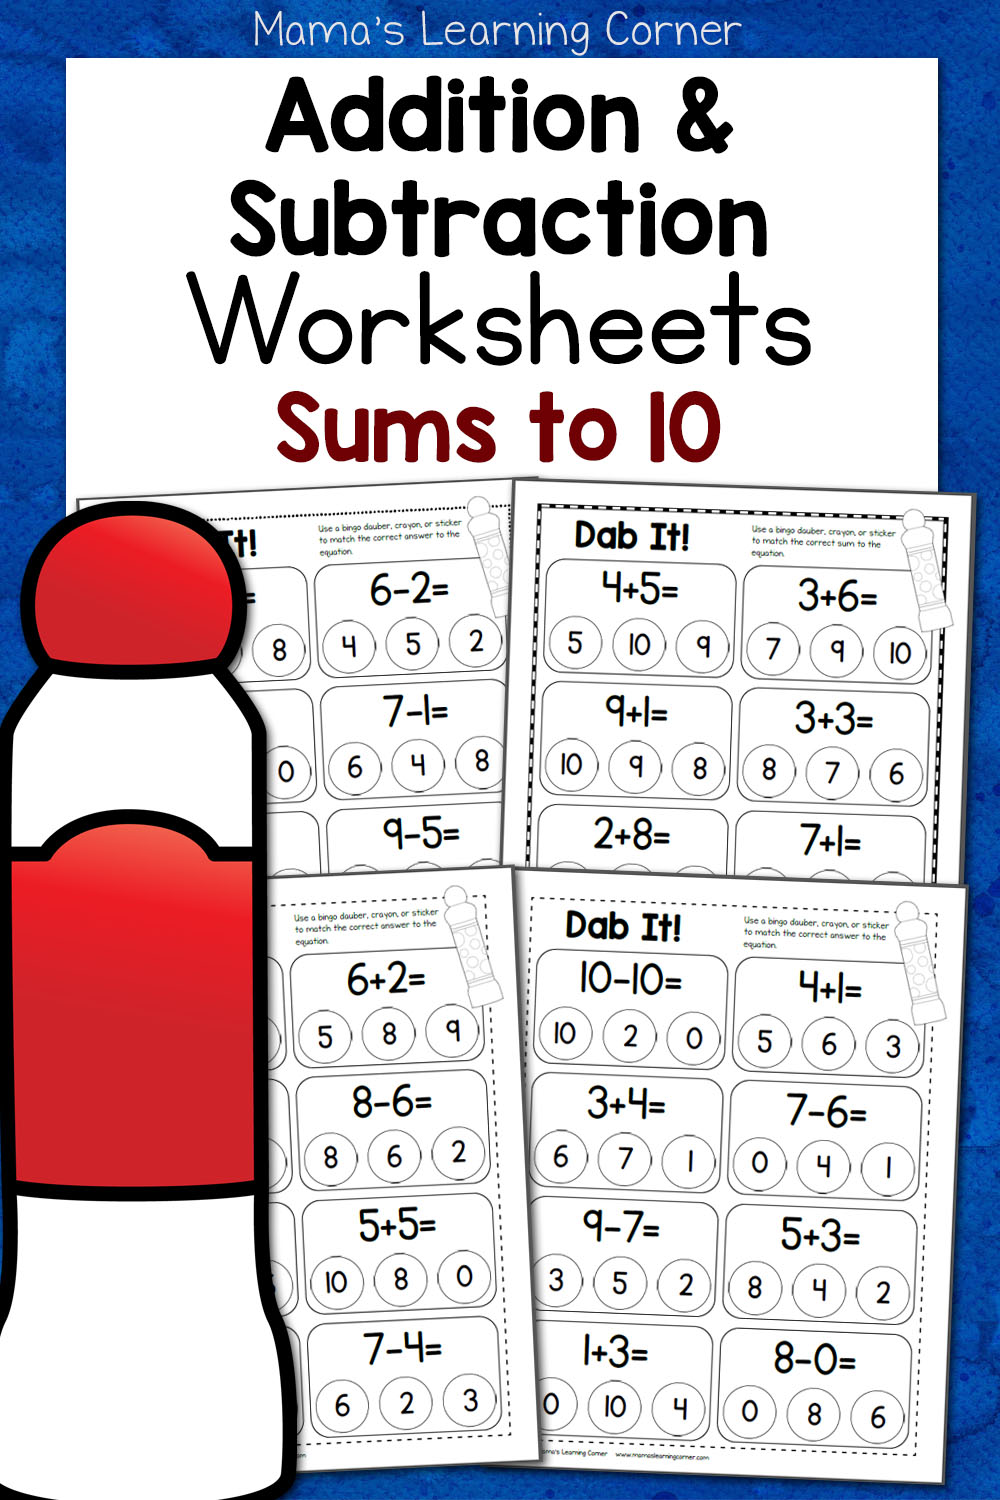 Dab It! Addition and Subtraction Worksheets - Mamas Learning Corner